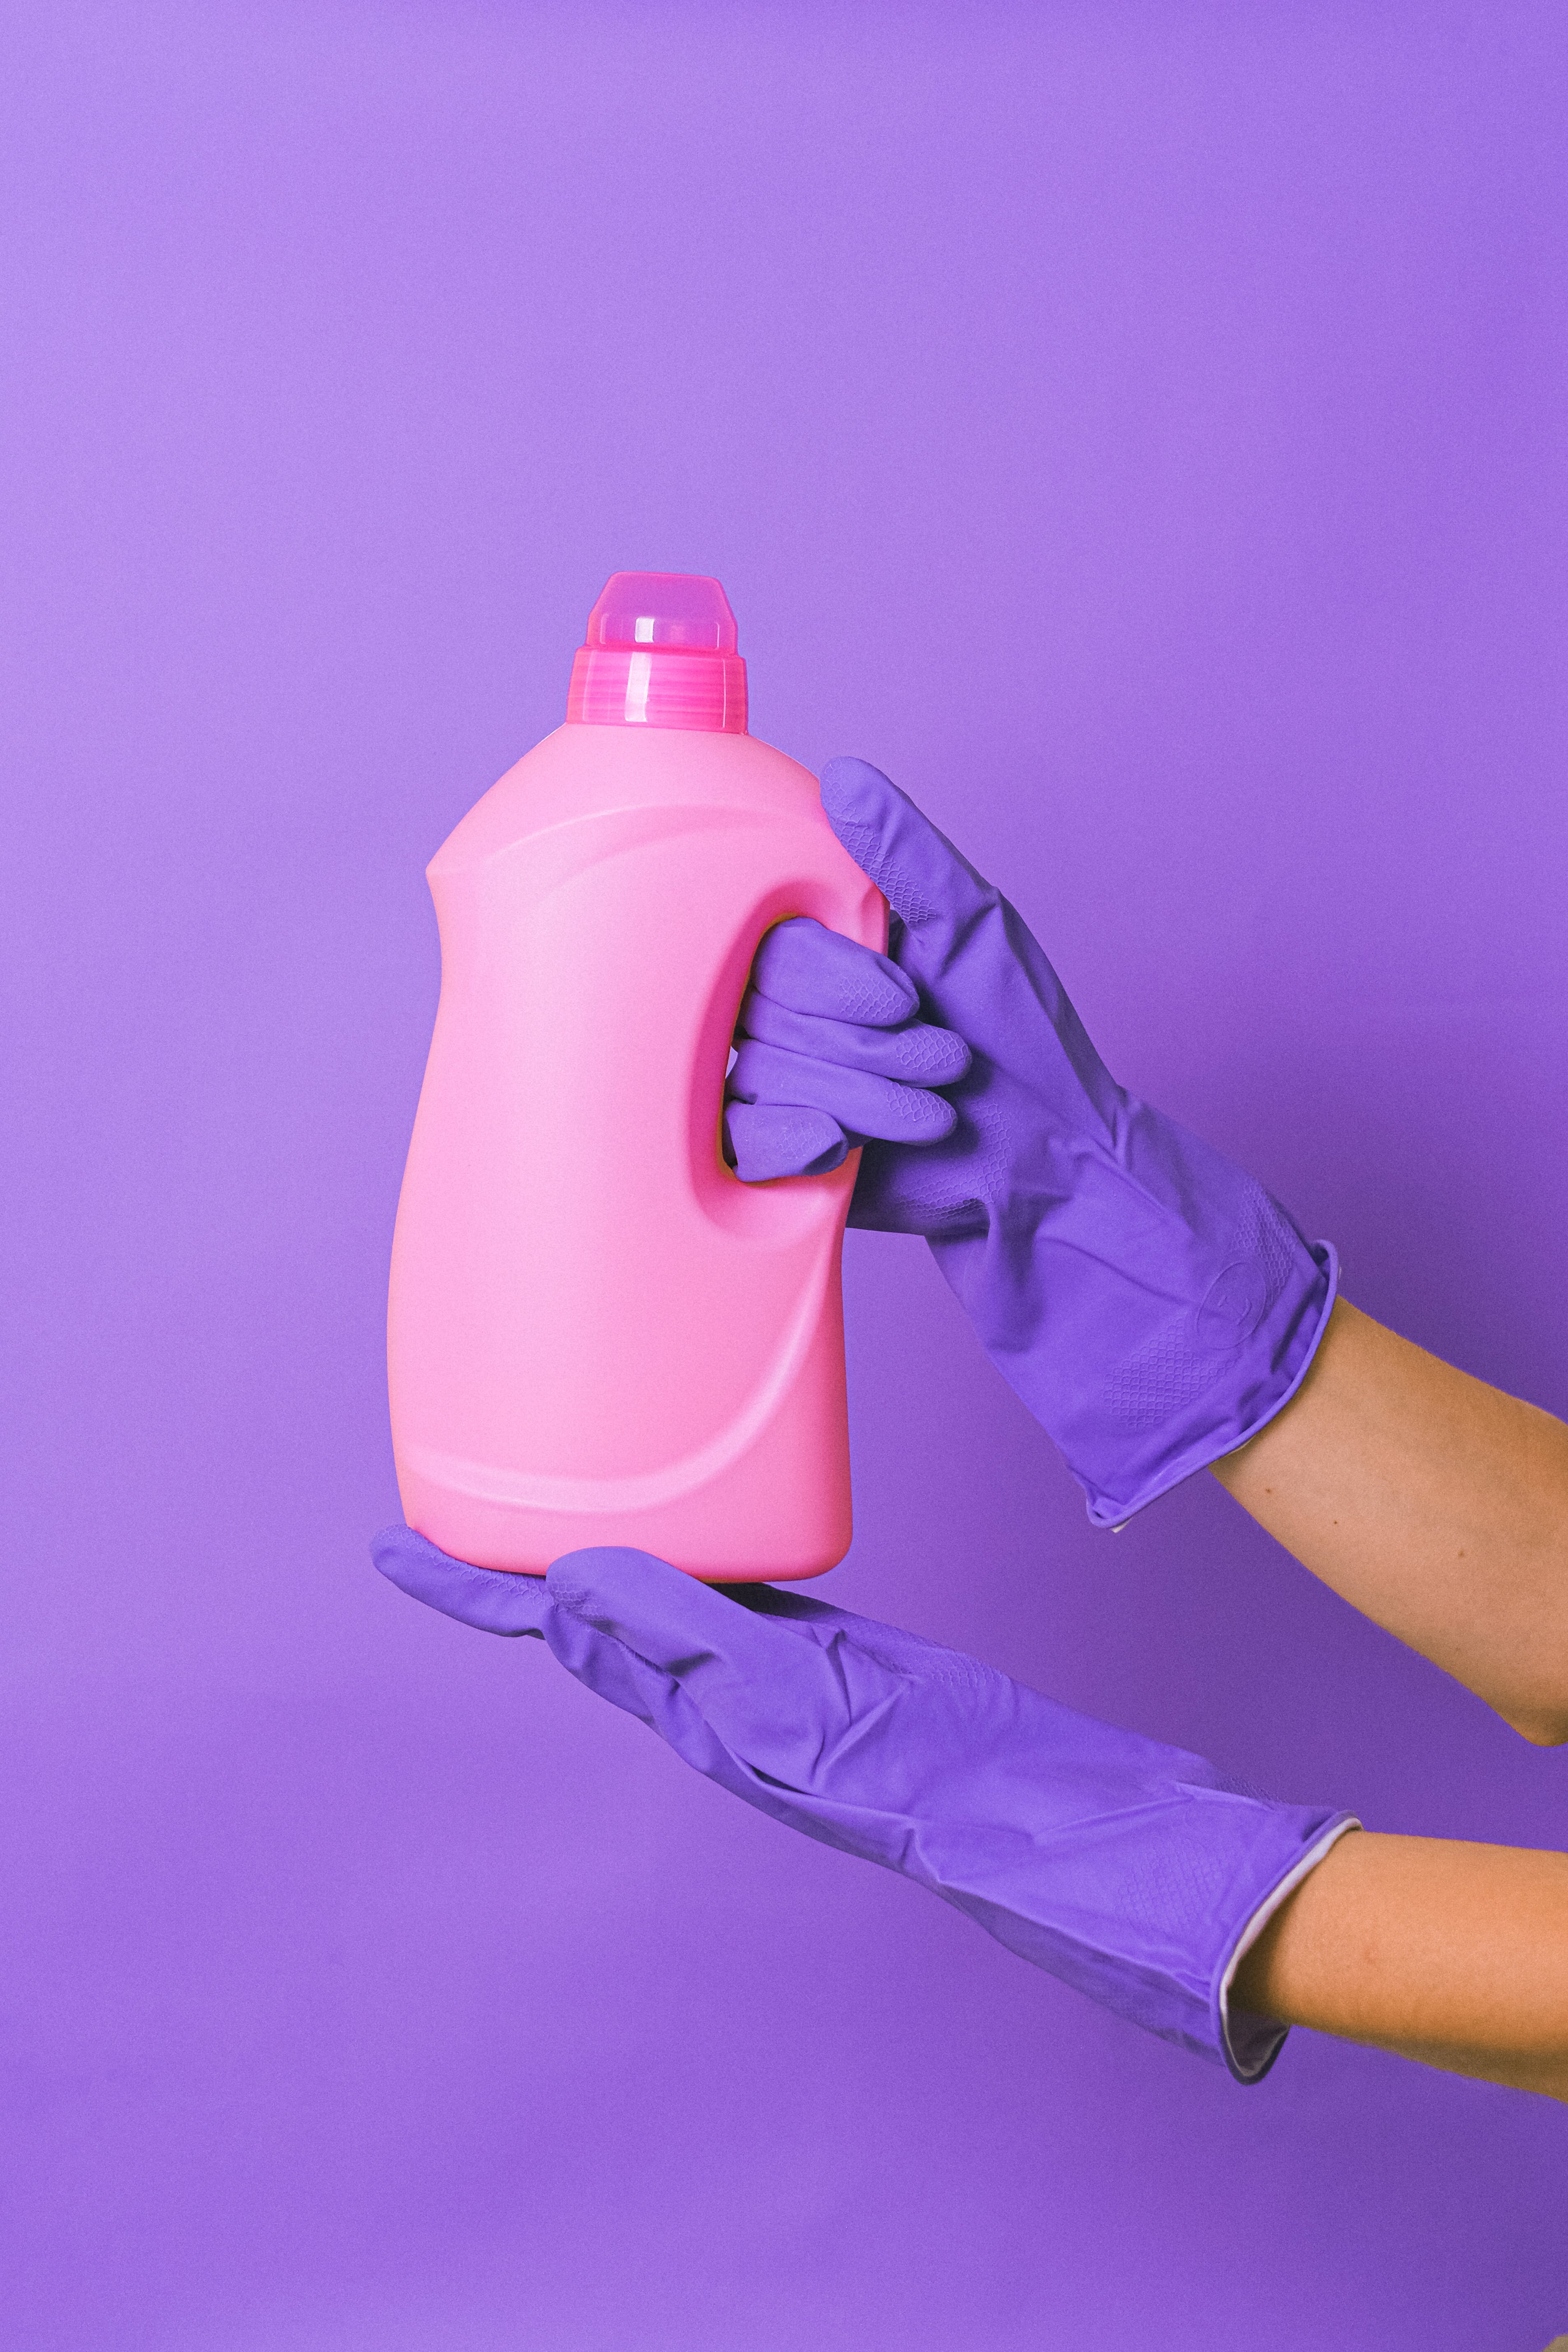 Mix laundry detergent and baking soda to make a paste and apply it to stains before wiping it away. | Source: Pexels | Source: Pexels